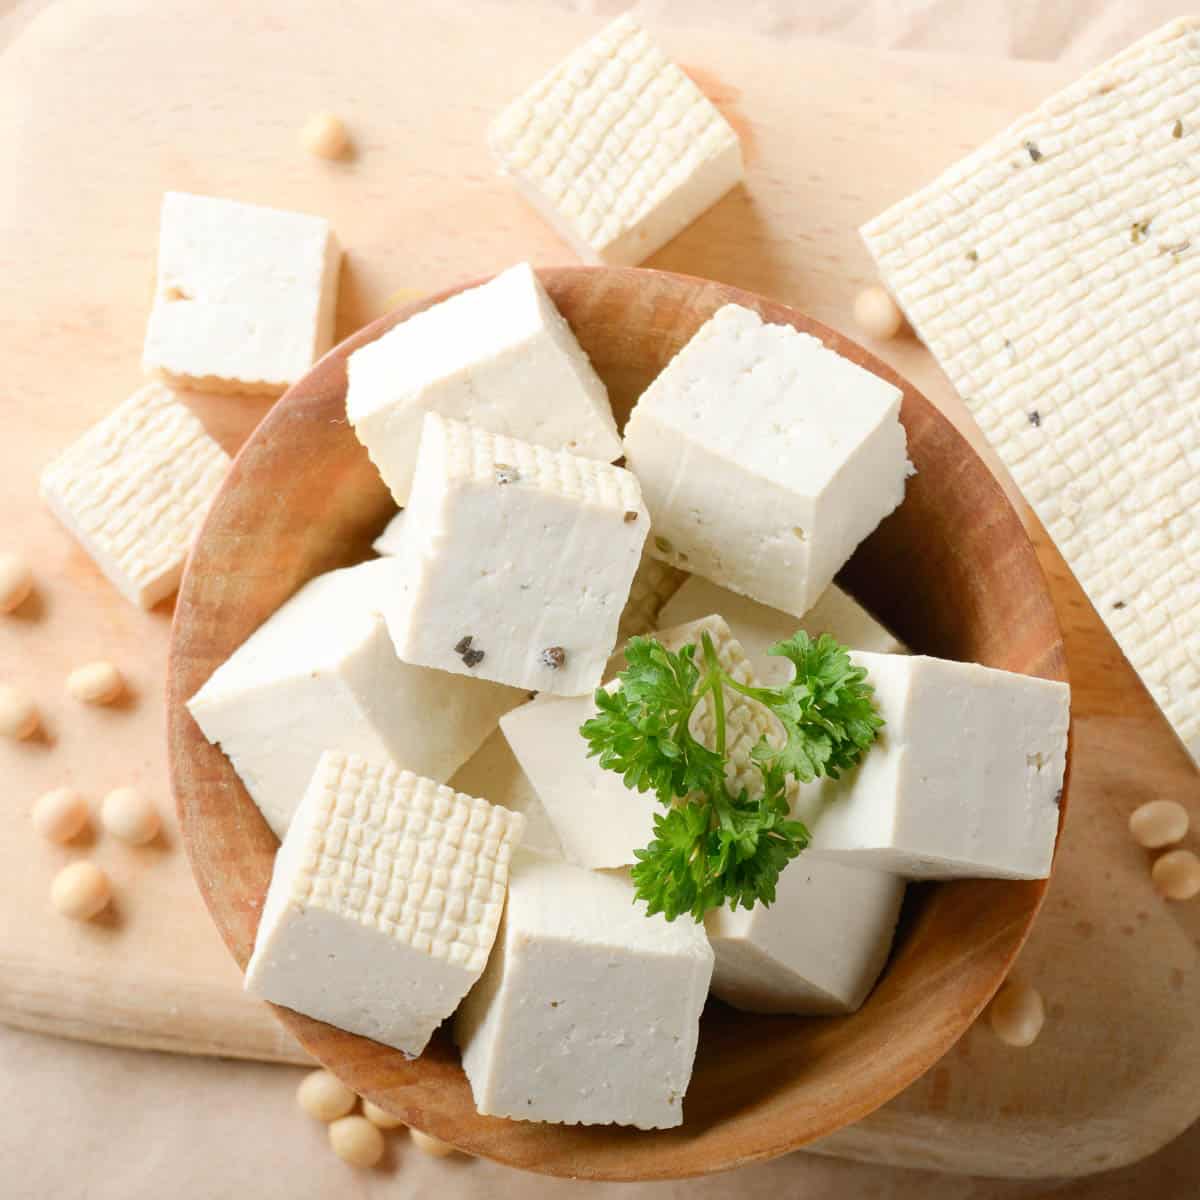 Wooden bowl with cubed tofu and a sprig of parsley